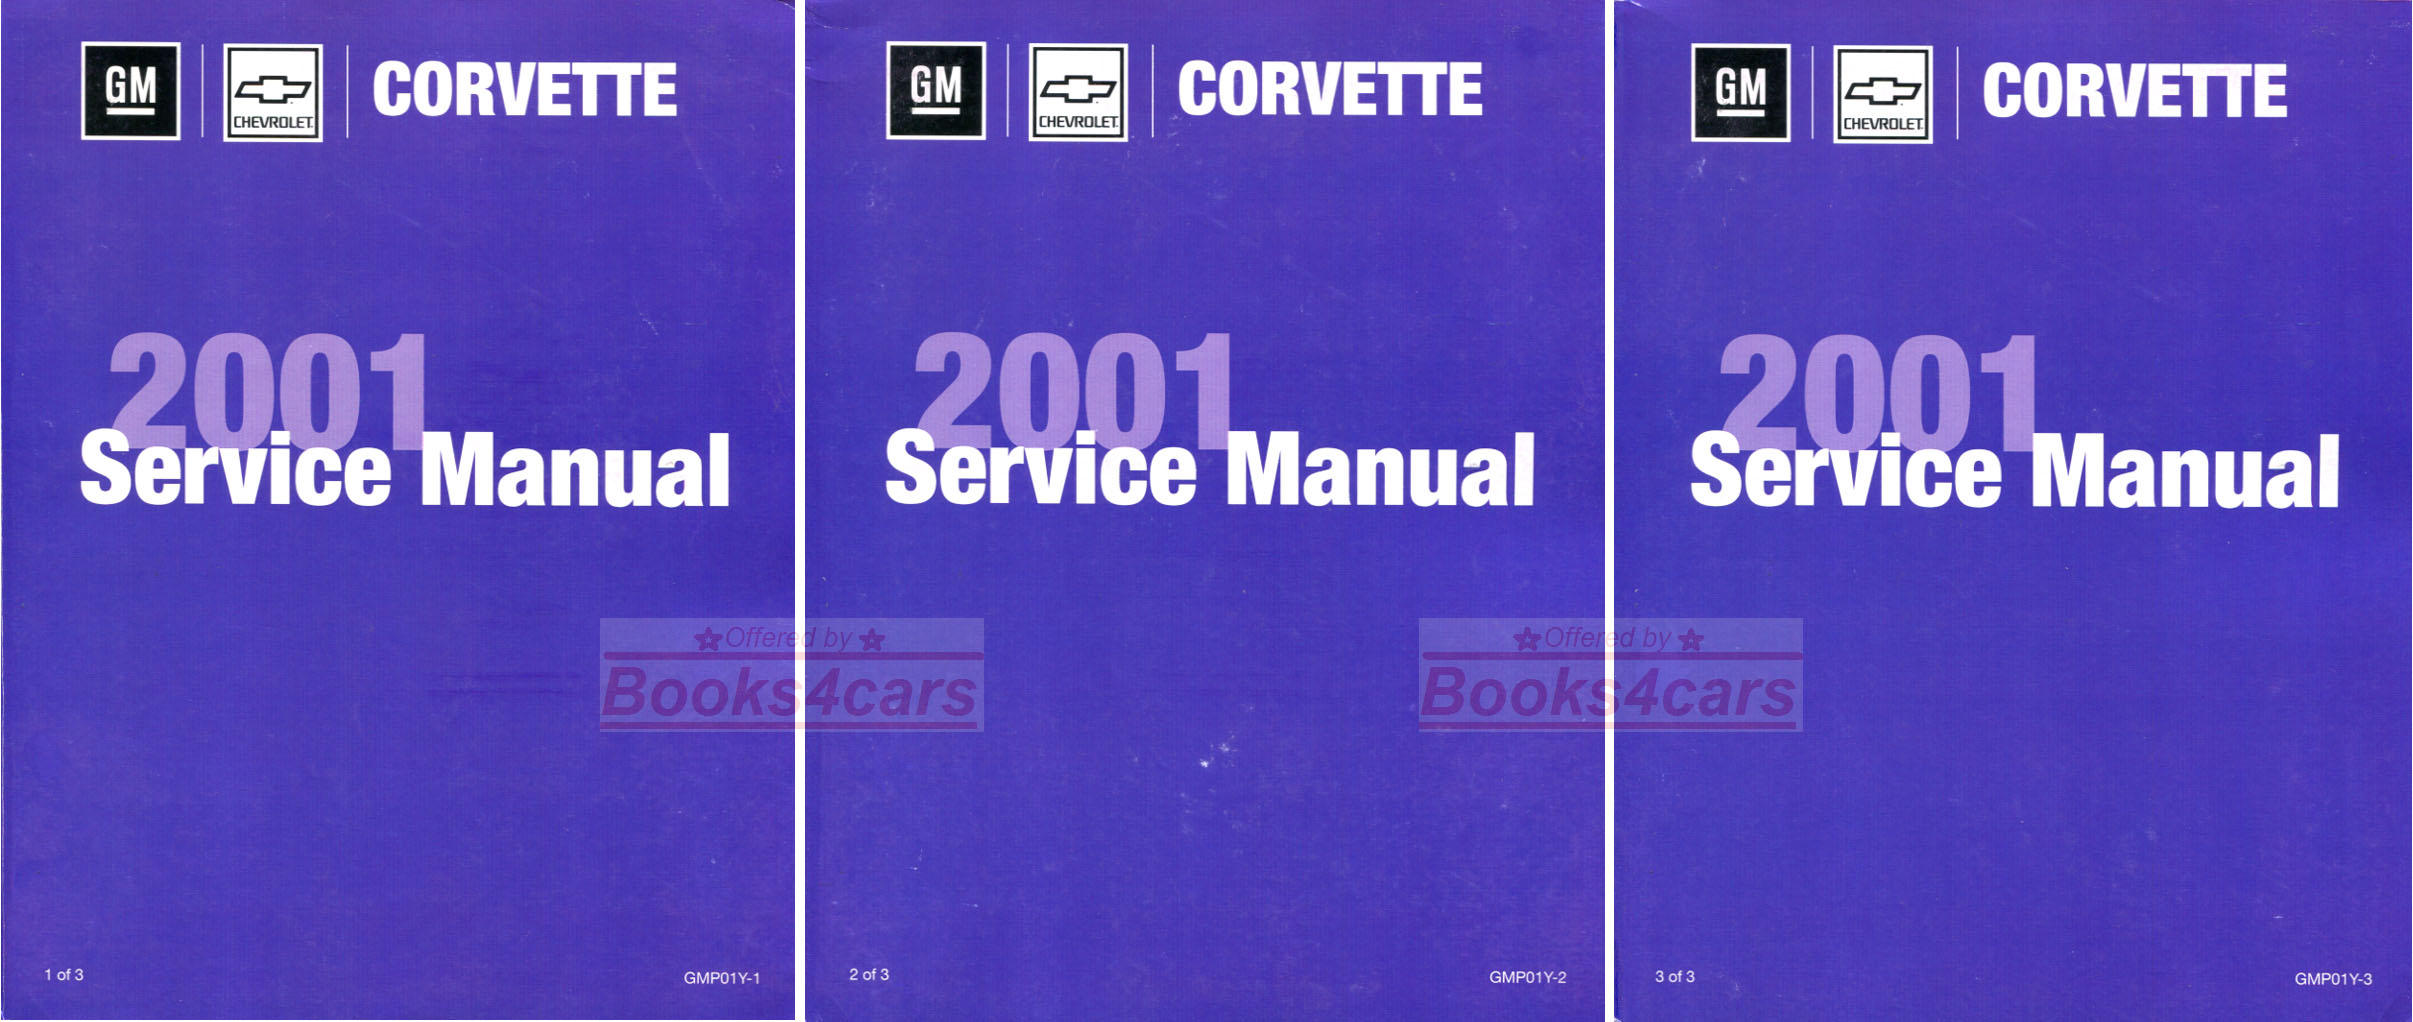 2001 Complete Corvette Shop Service Repair Manual 3 volume set Including Wiring Diagrams by Chevrolet includes ZO6 LS6